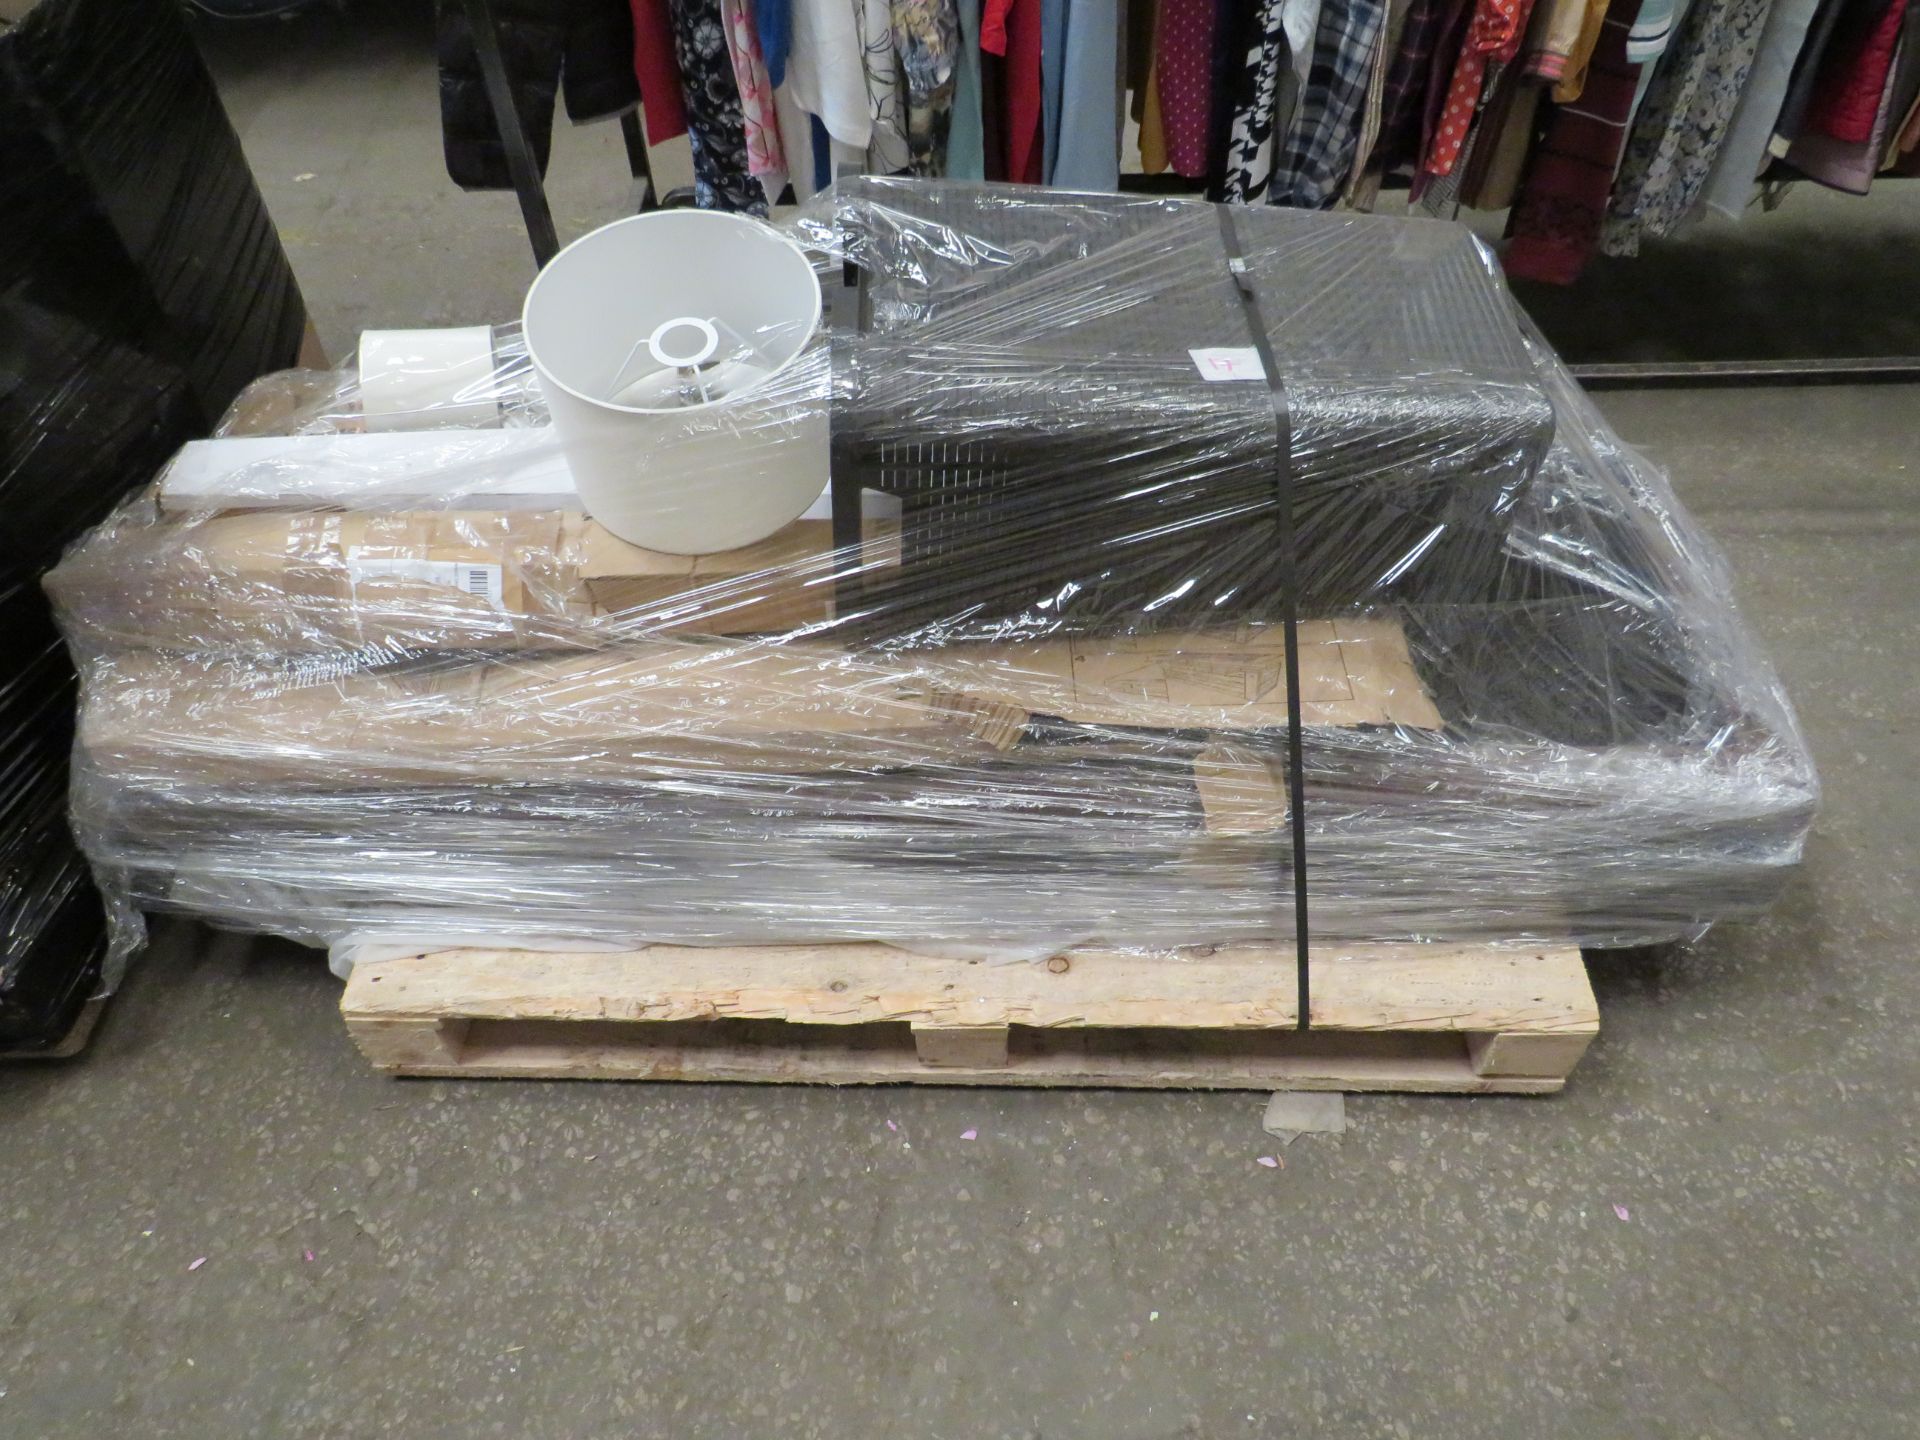 Pallet of Unmanifested Customer Returns Containing Approx 6 Items - Items In This Lot May Be